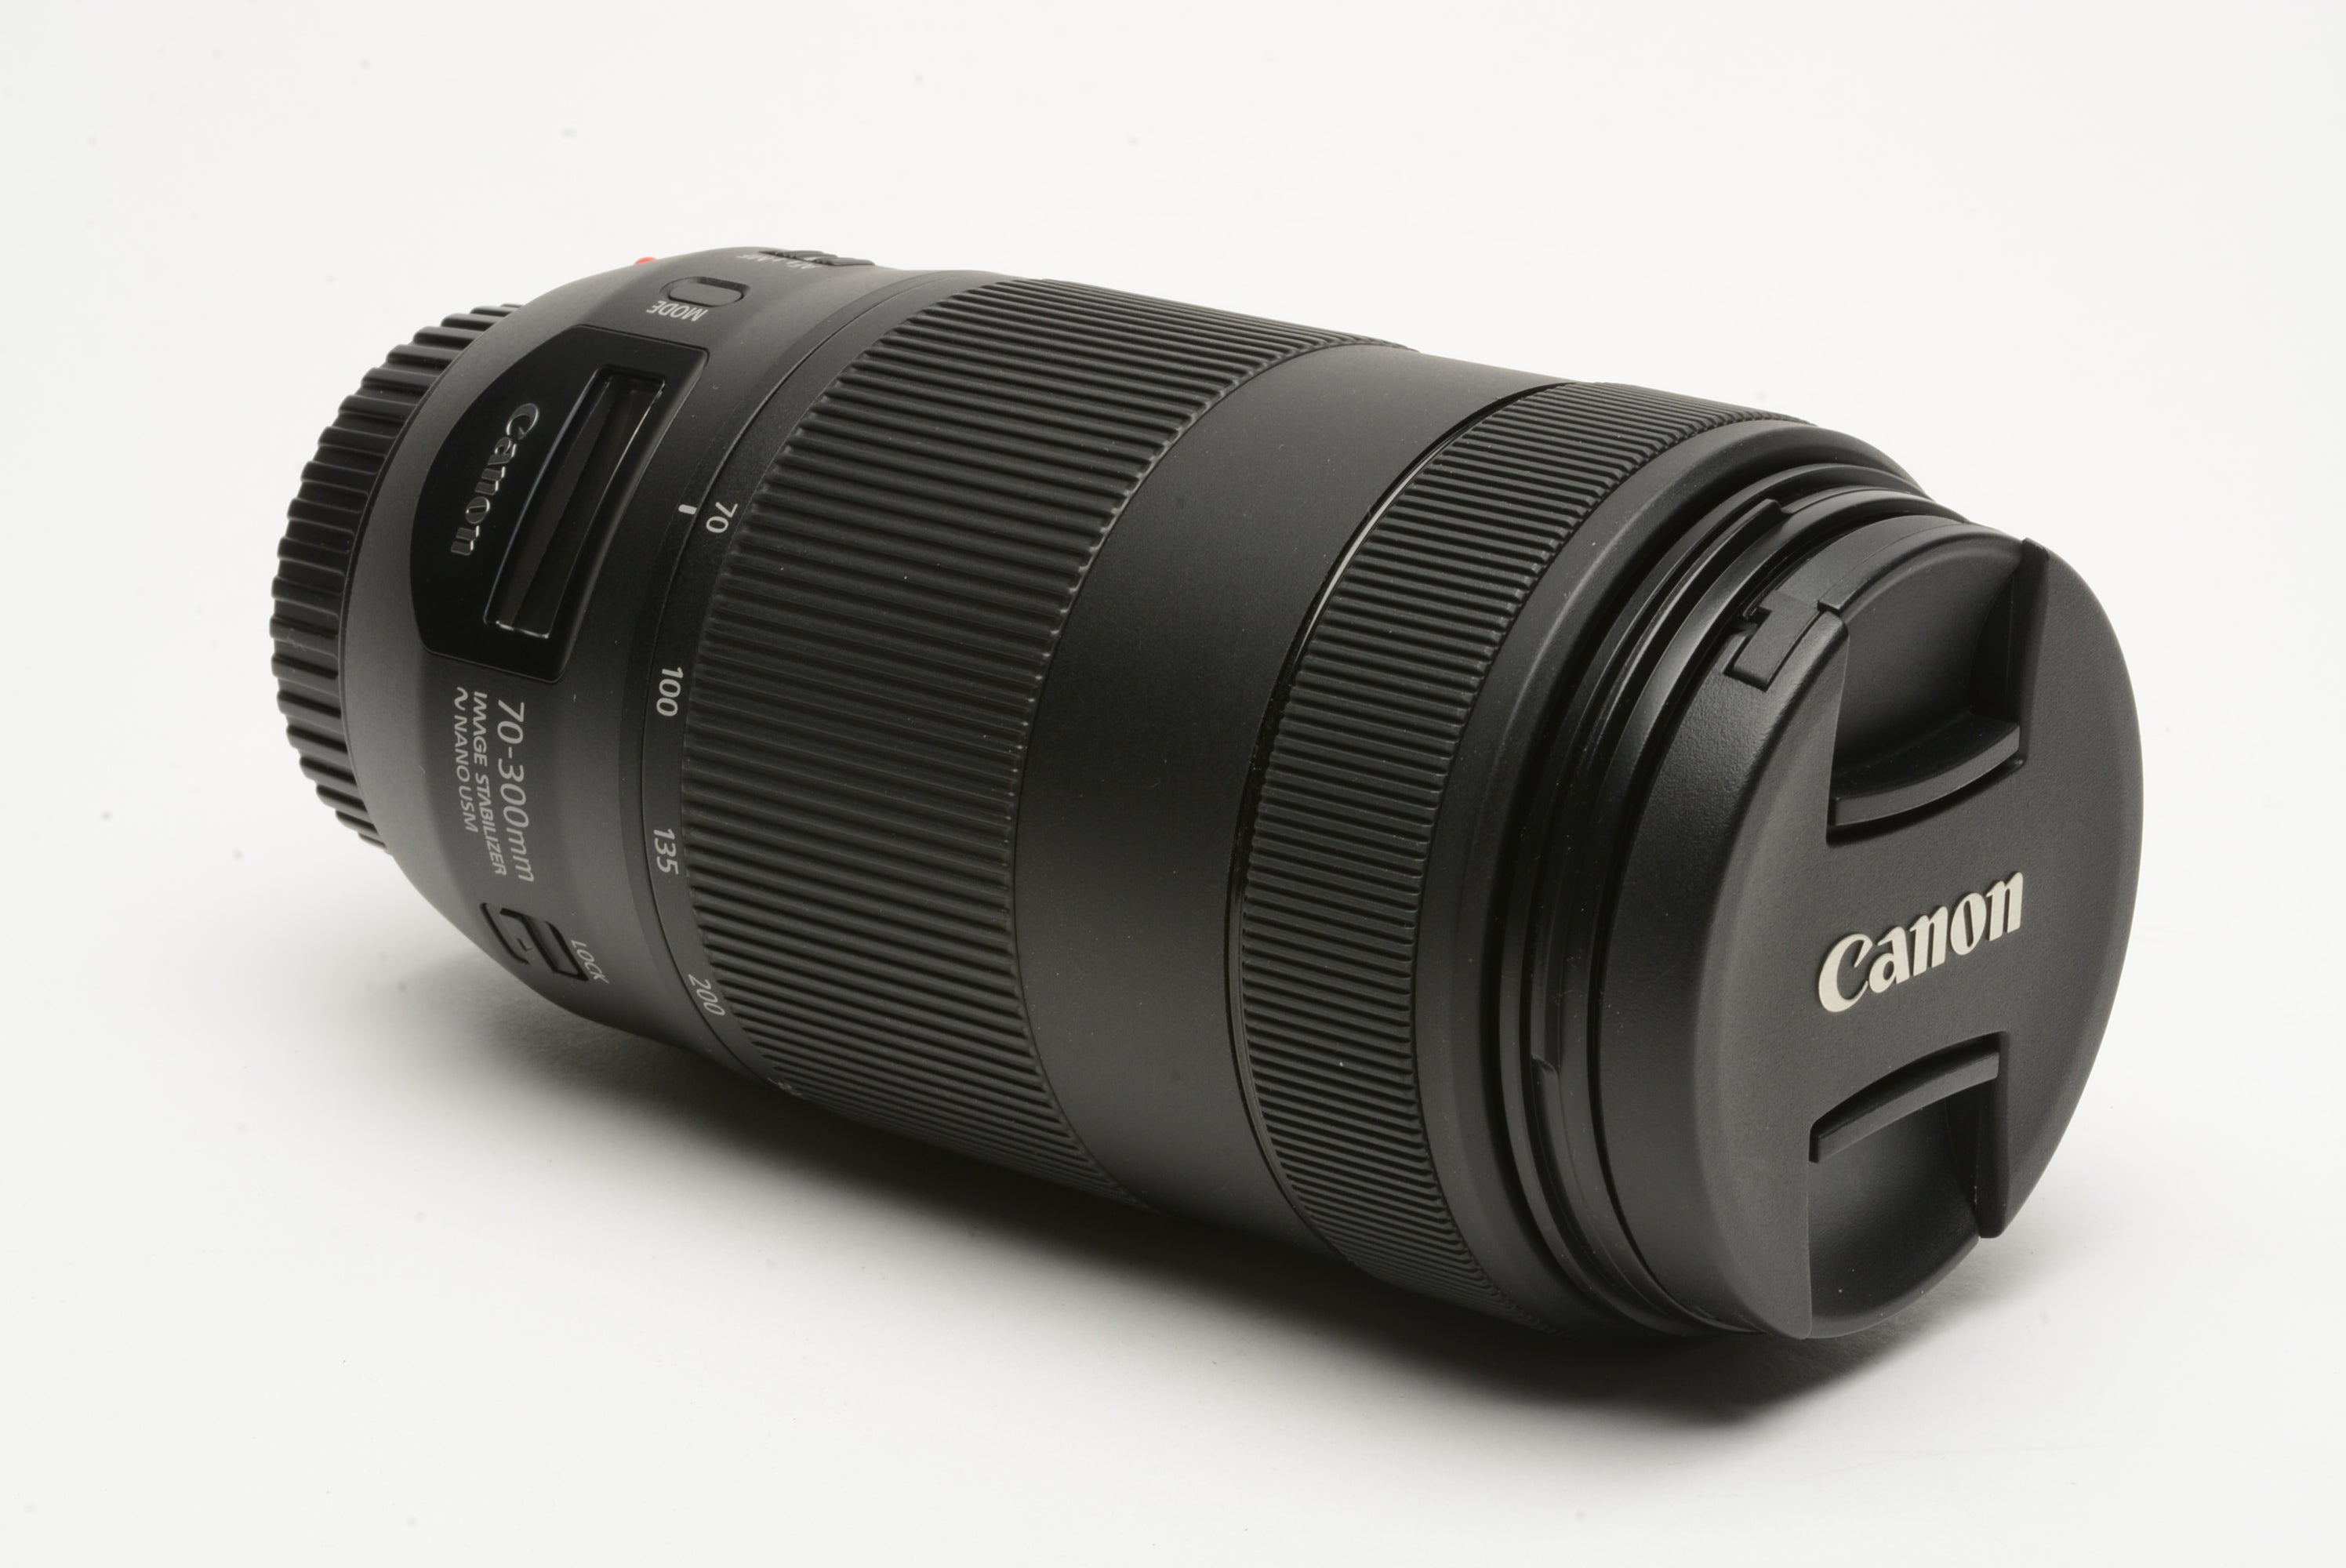 Canon EF 70-300mm f4-5.6 IS II USM Lens, caps, barely ever